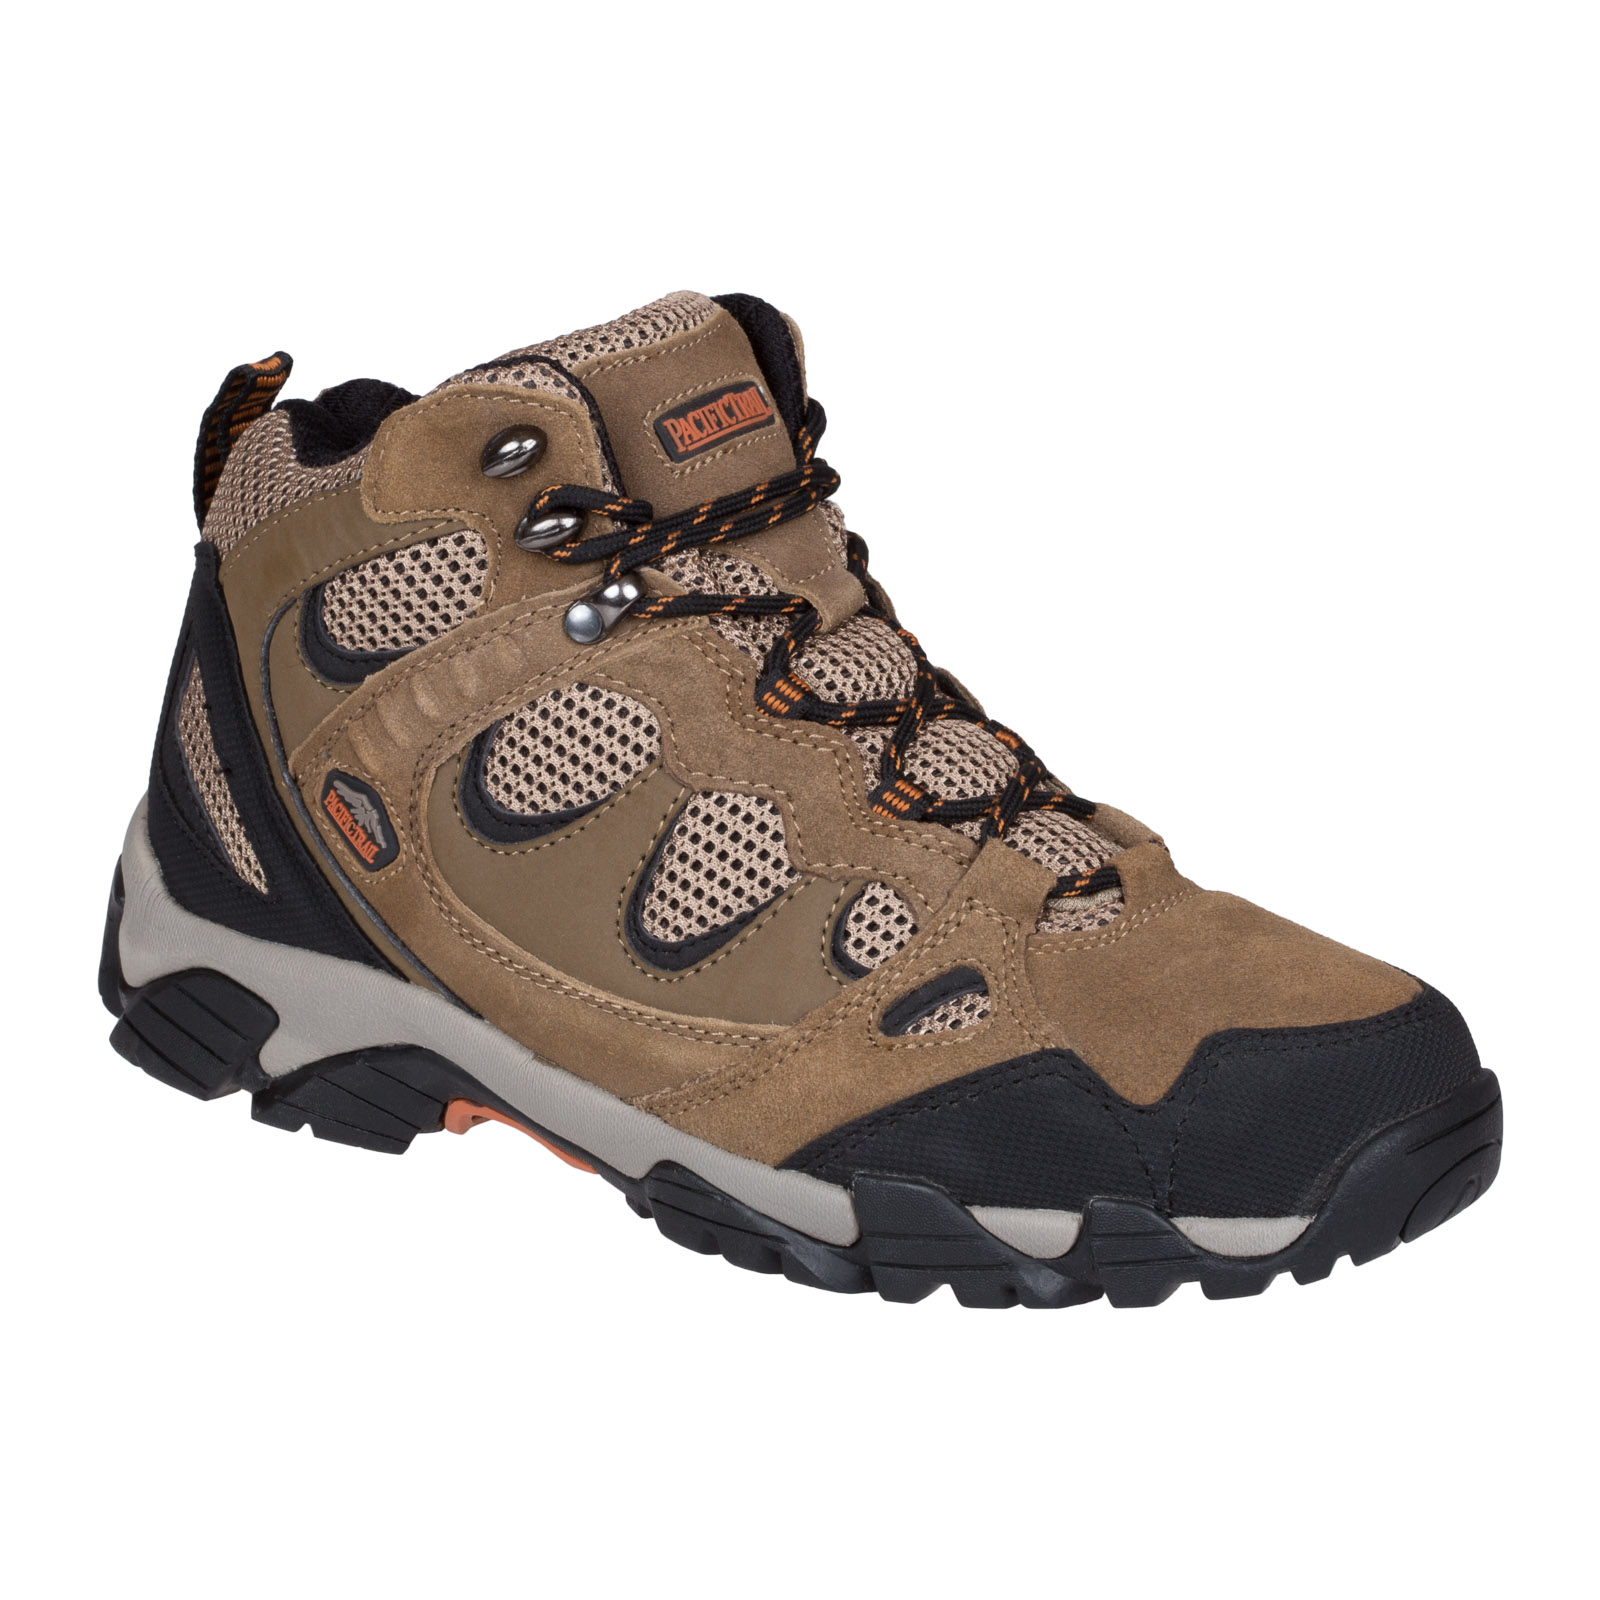 PACIFIC TRAIL SEQUOIA CHARCOAL YELLOW J010316052 MENS US SIZES 